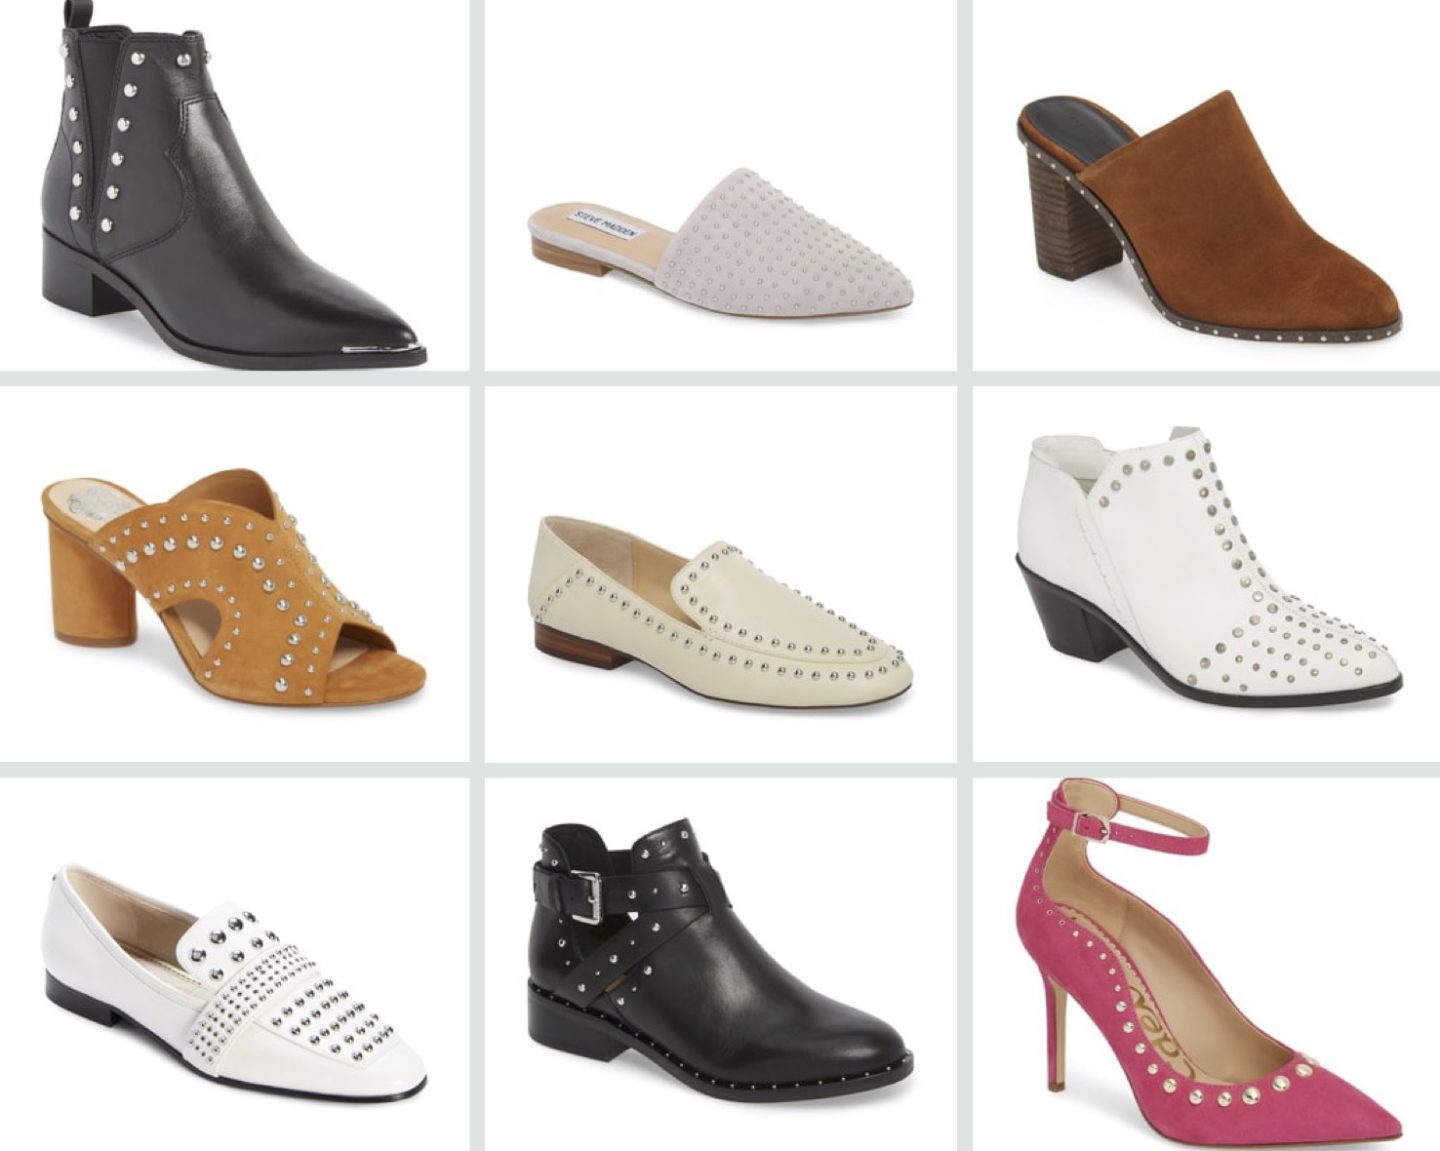 Nordstrom Anniversary Sale Trends to Look for: Studs